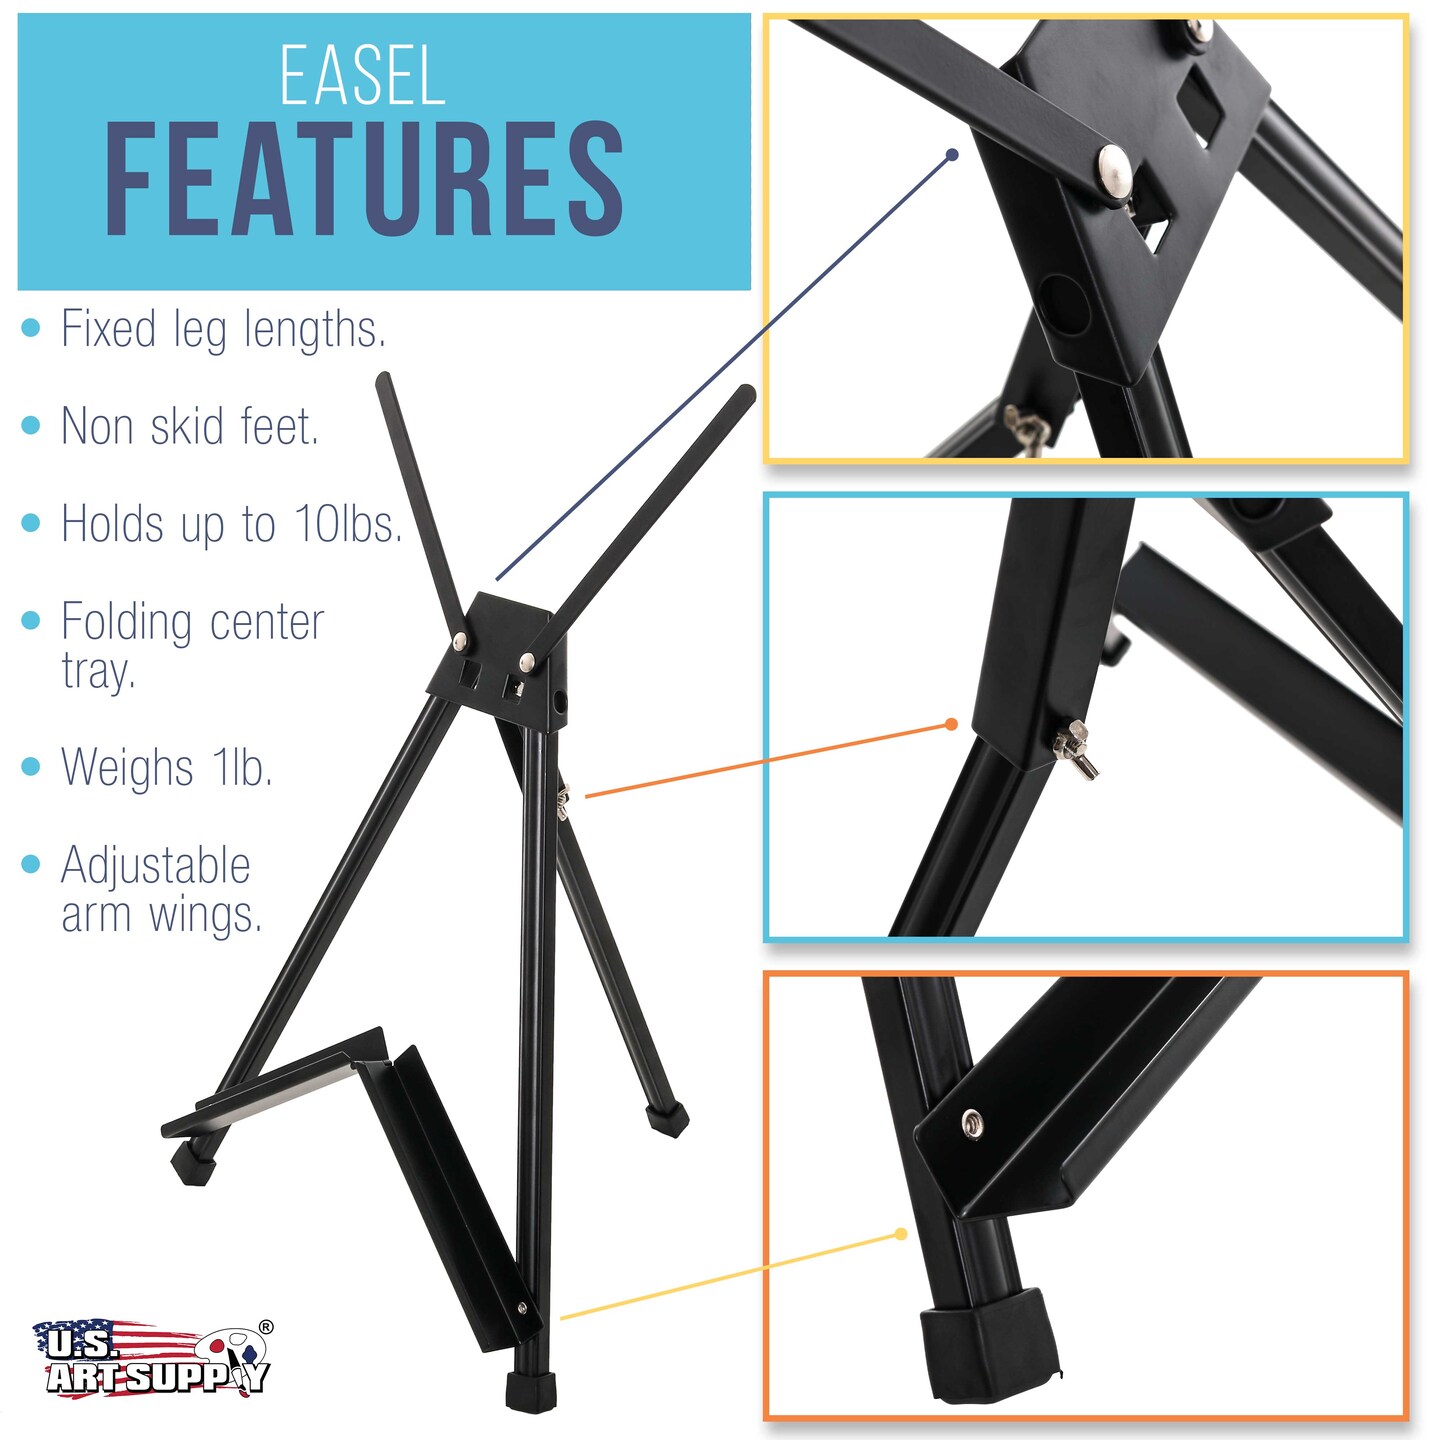 15&#x22; to 21&#x22; High Adjustable Black Aluminum Tabletop Display Easel (Pack of 3) - Portable Artist Tripod Stand with Extension Arm Wings, Folding Frame